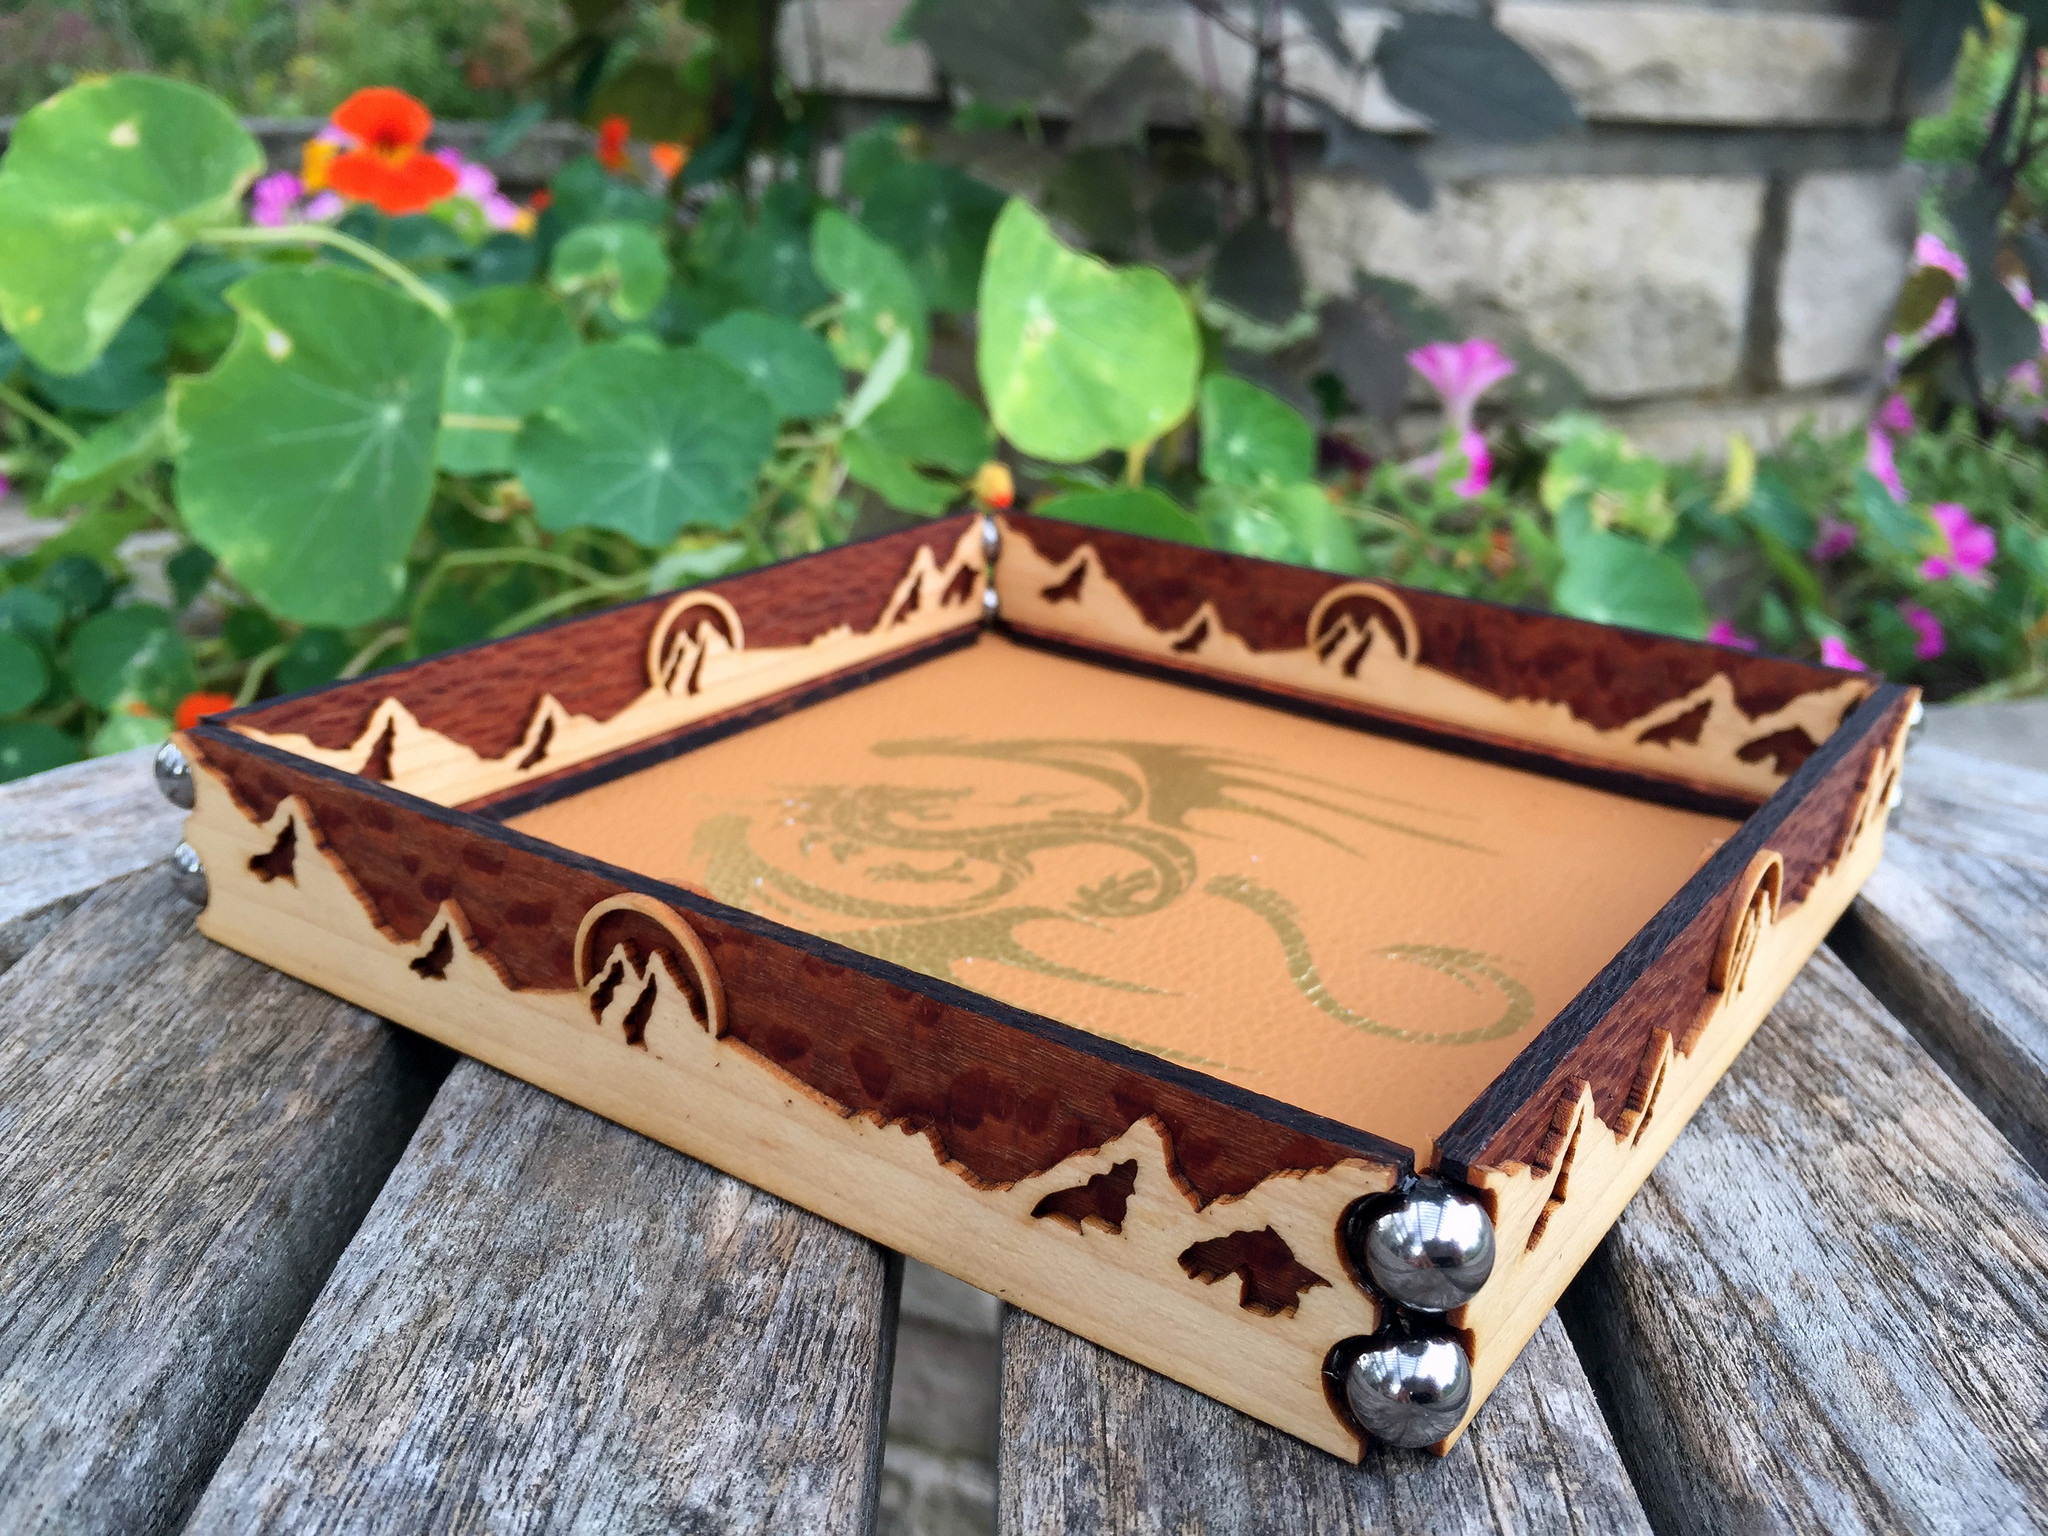 Scroll dice rolling tray with flowers